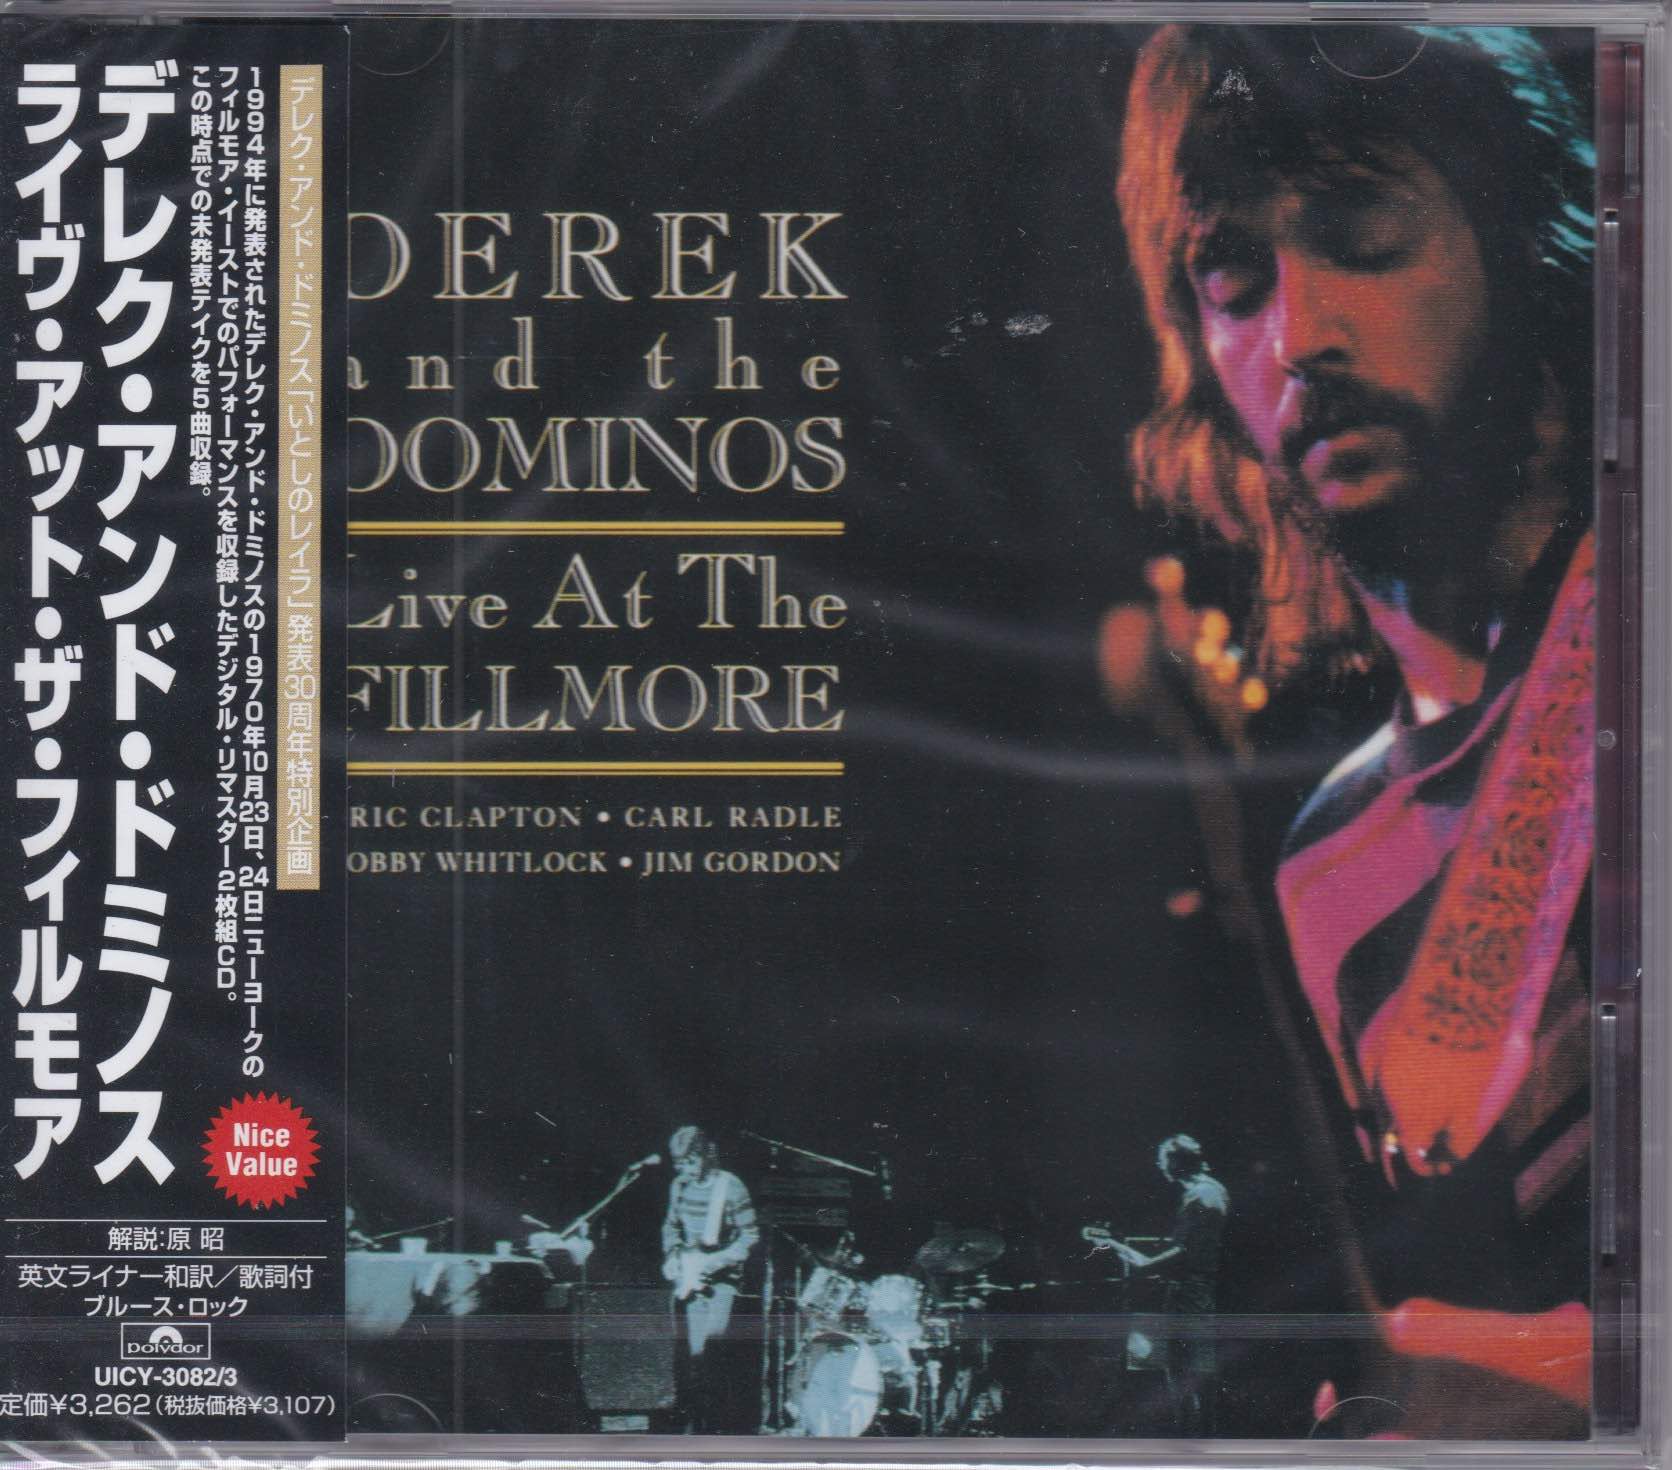 Derek and the Dominos ‎– Live At The Fillmore